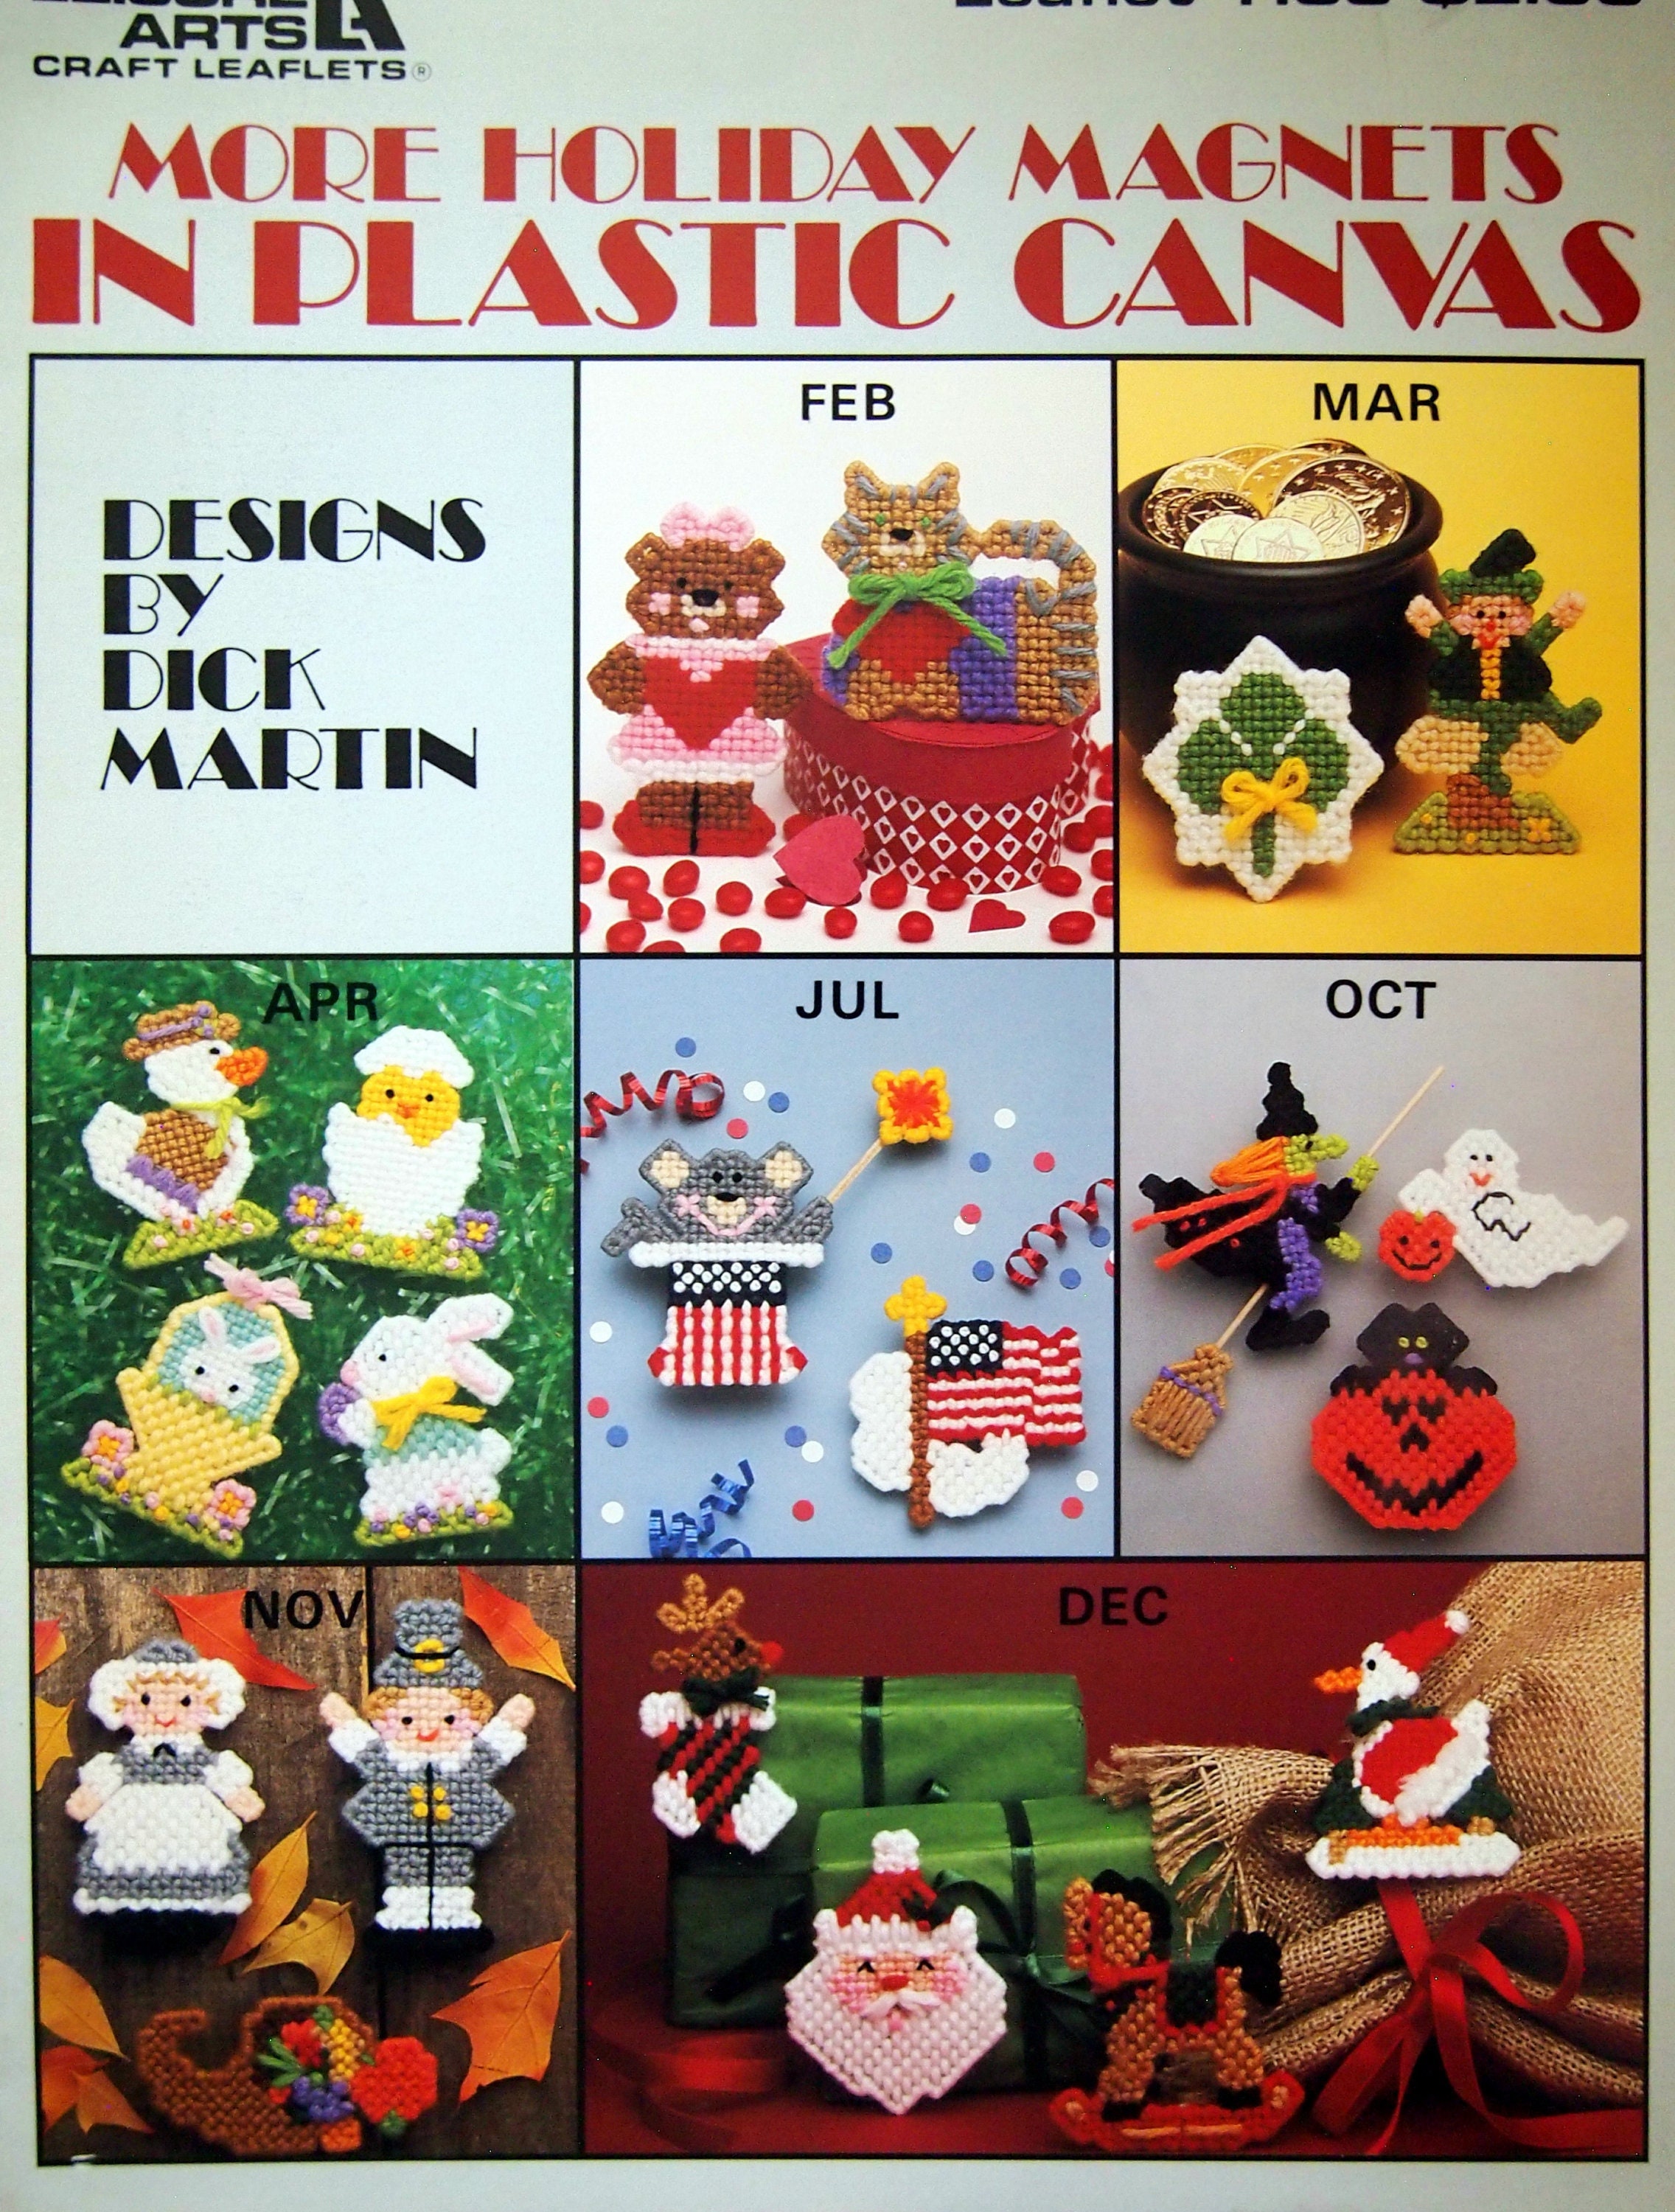 More Holiday Magnets in Plastic Canvas by Dick Martin and Leisure